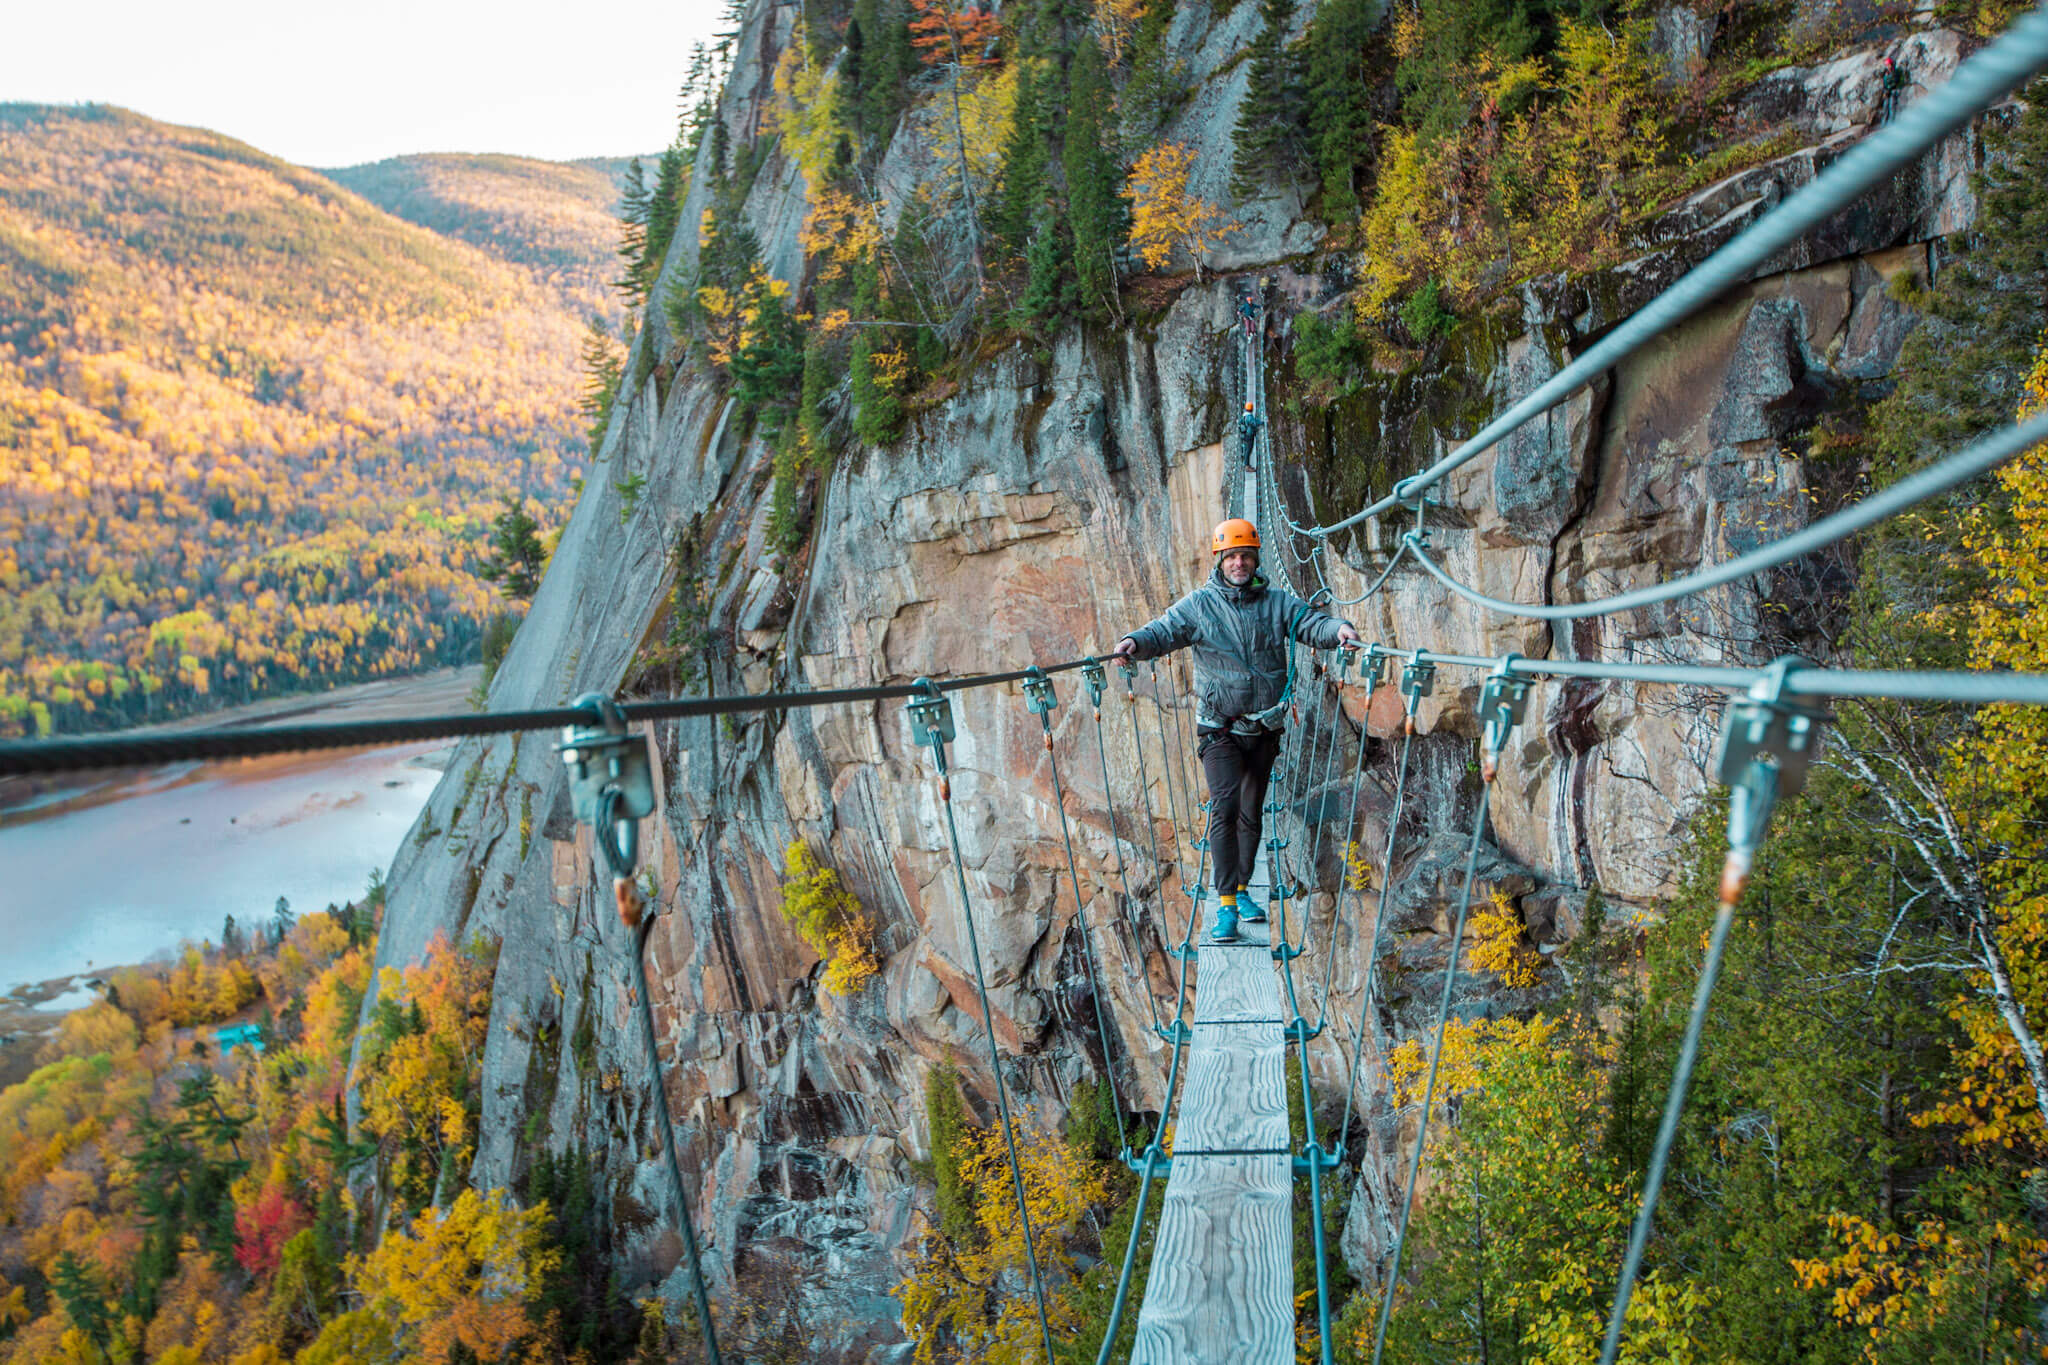 A climber poses for a photo on a narrow foot bridge suspended between two rock cliffs